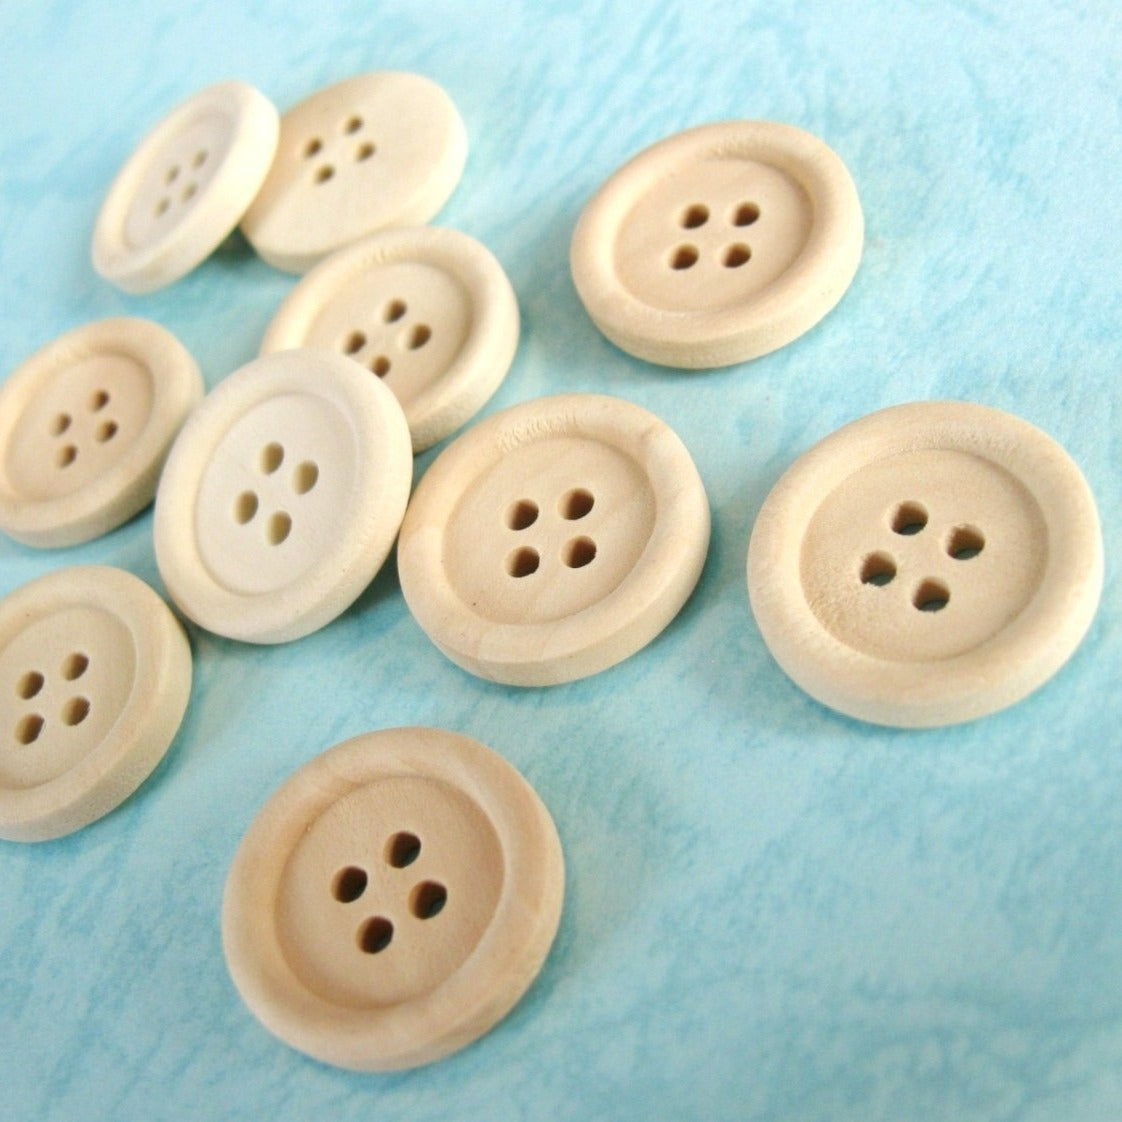 12 Natural unfinished wood buttons 13mm, 15mm, 18mm, 20mm, 25mm